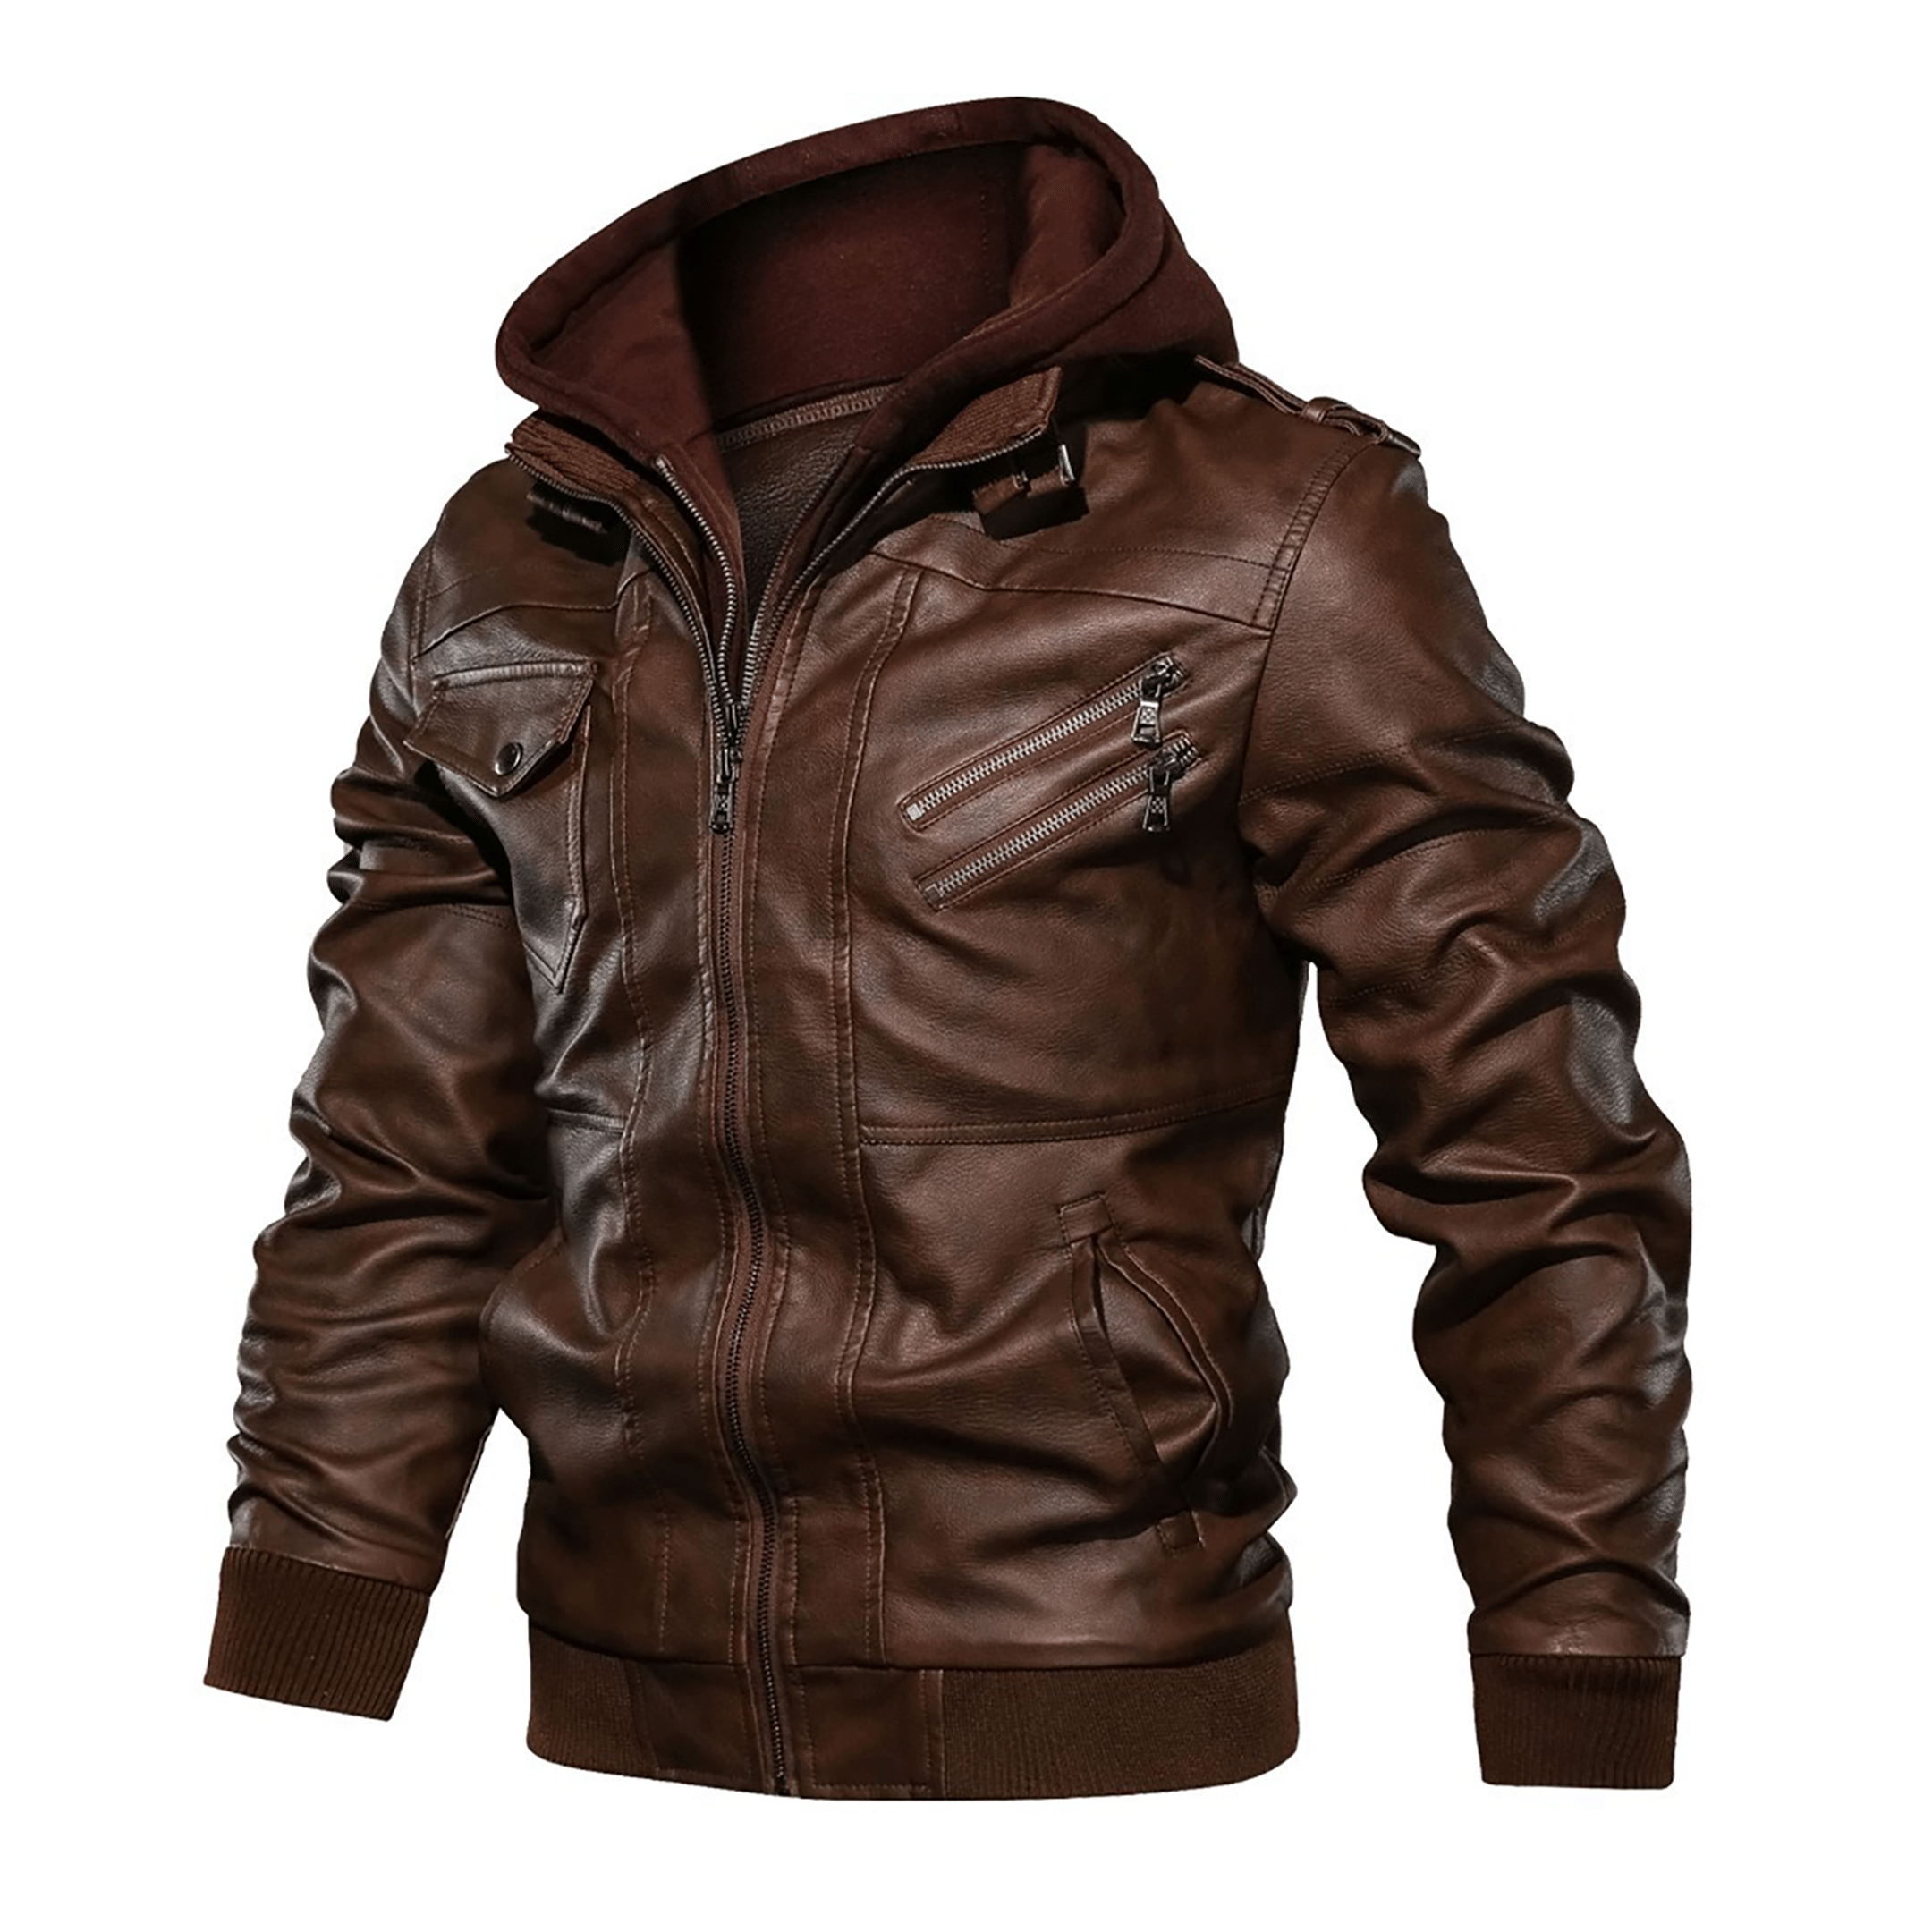 Top leather jackets and latest products 195